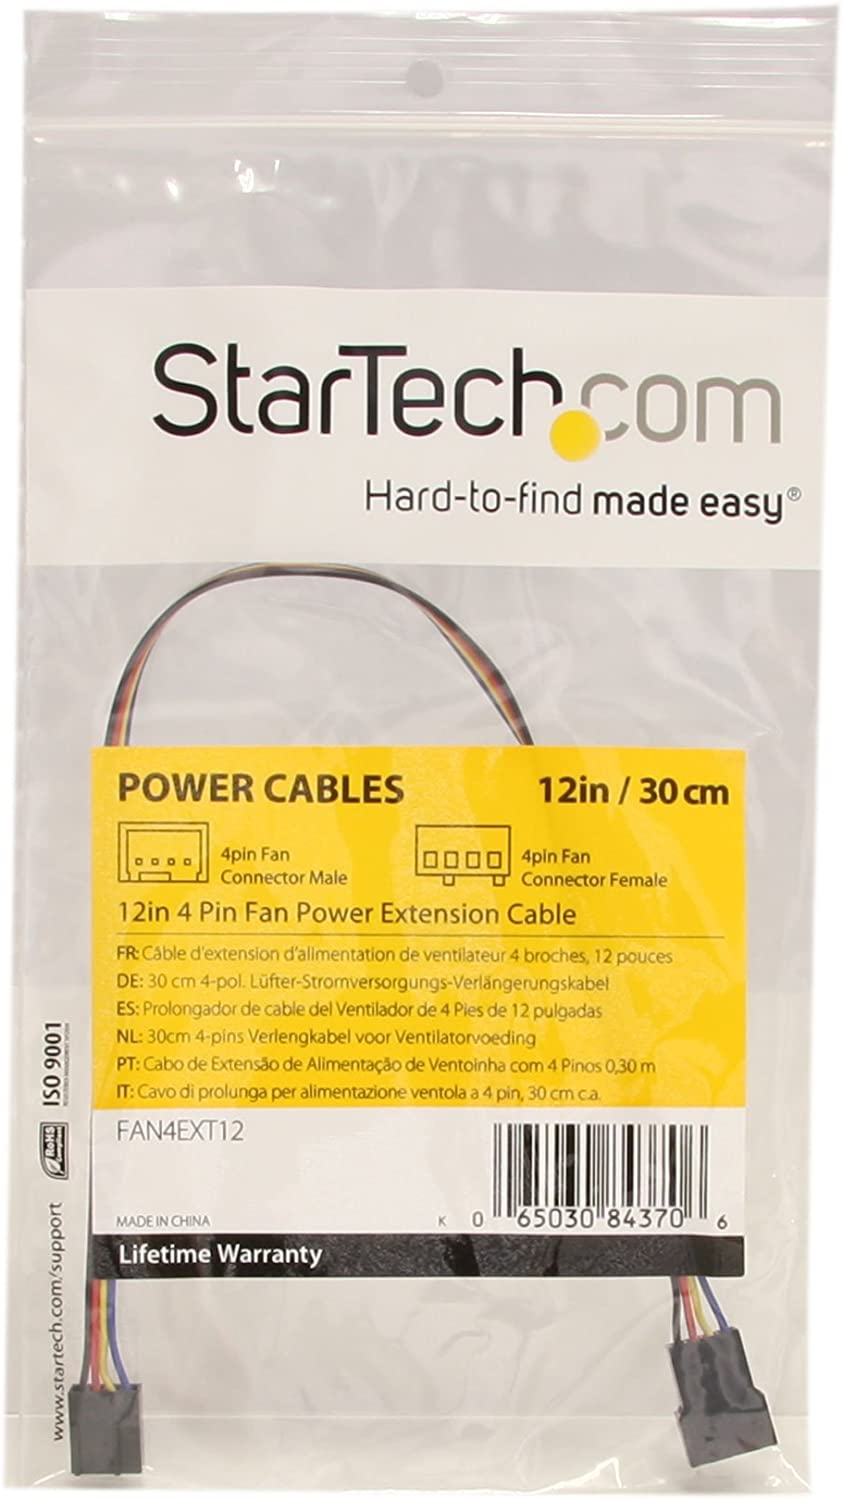 StarTech.com 12in 4 Pin Fan Power Extension Cable - M/F - Fan power extension cable - 4 pin PWM (M) to 4 pin PWM (F) - FAN4EXT12 4 Pin Extension 12in